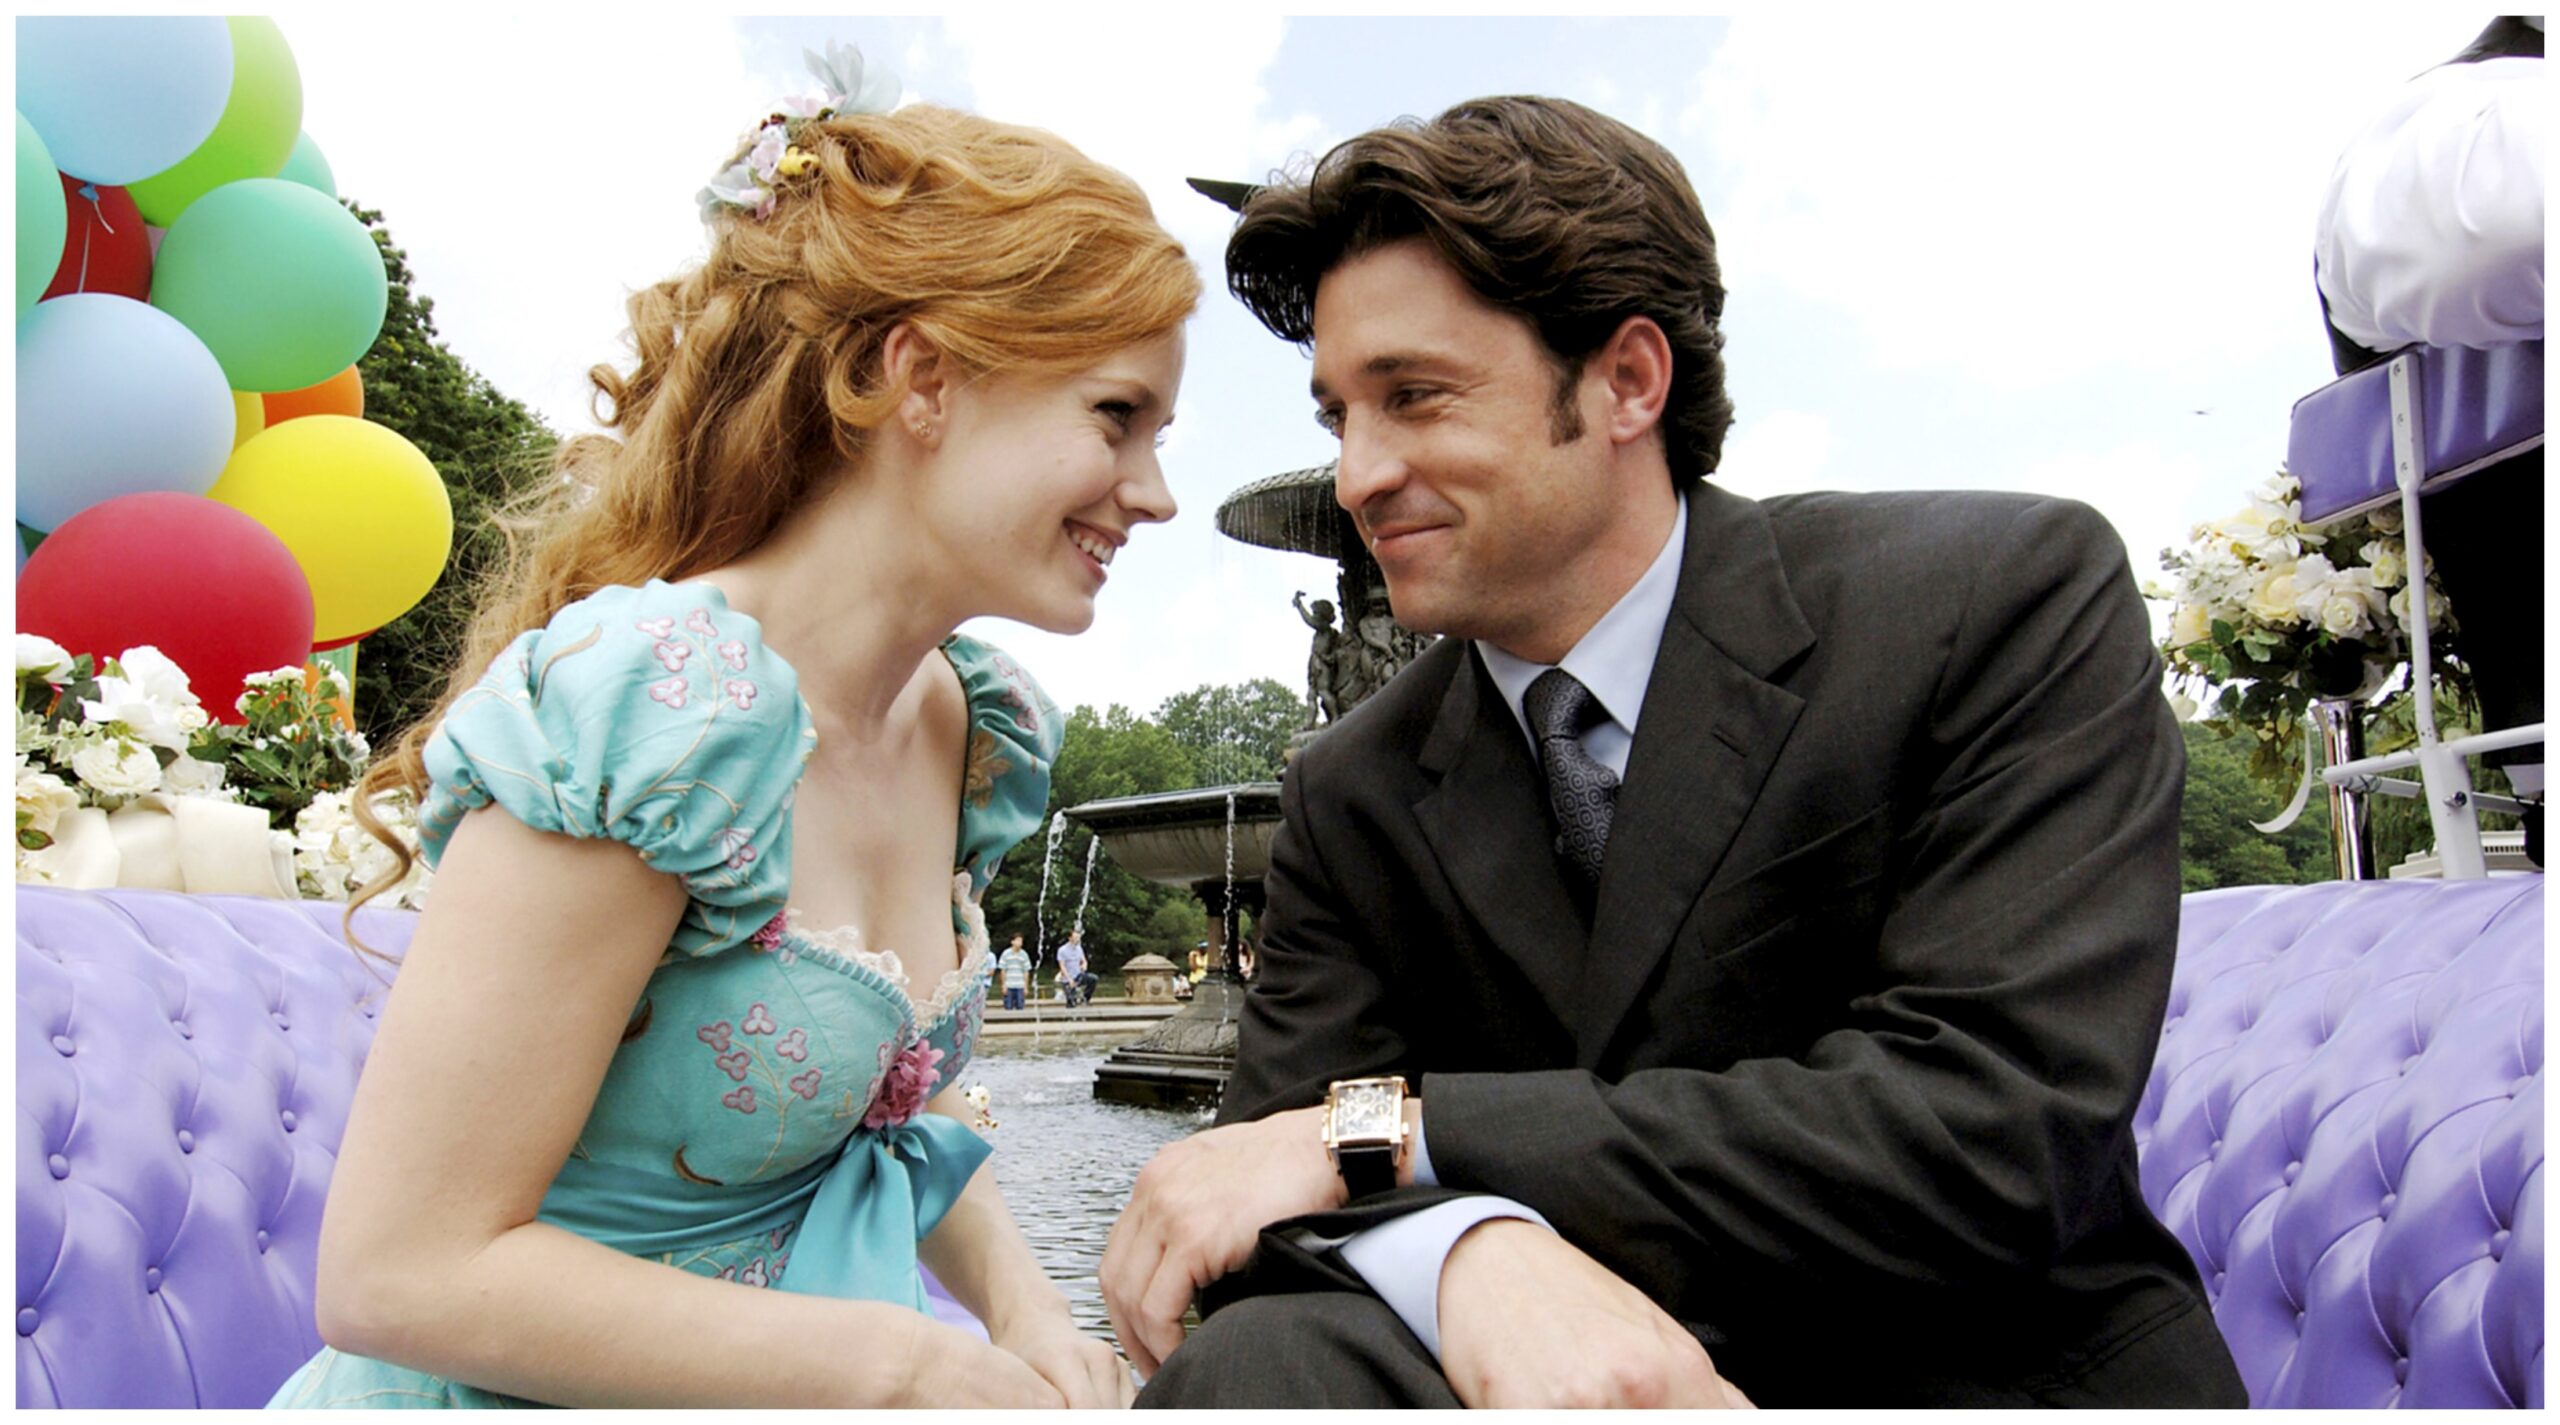 Amy Adams and Patrick Dempsey as Giselle and Robert in Disney's Enchanted